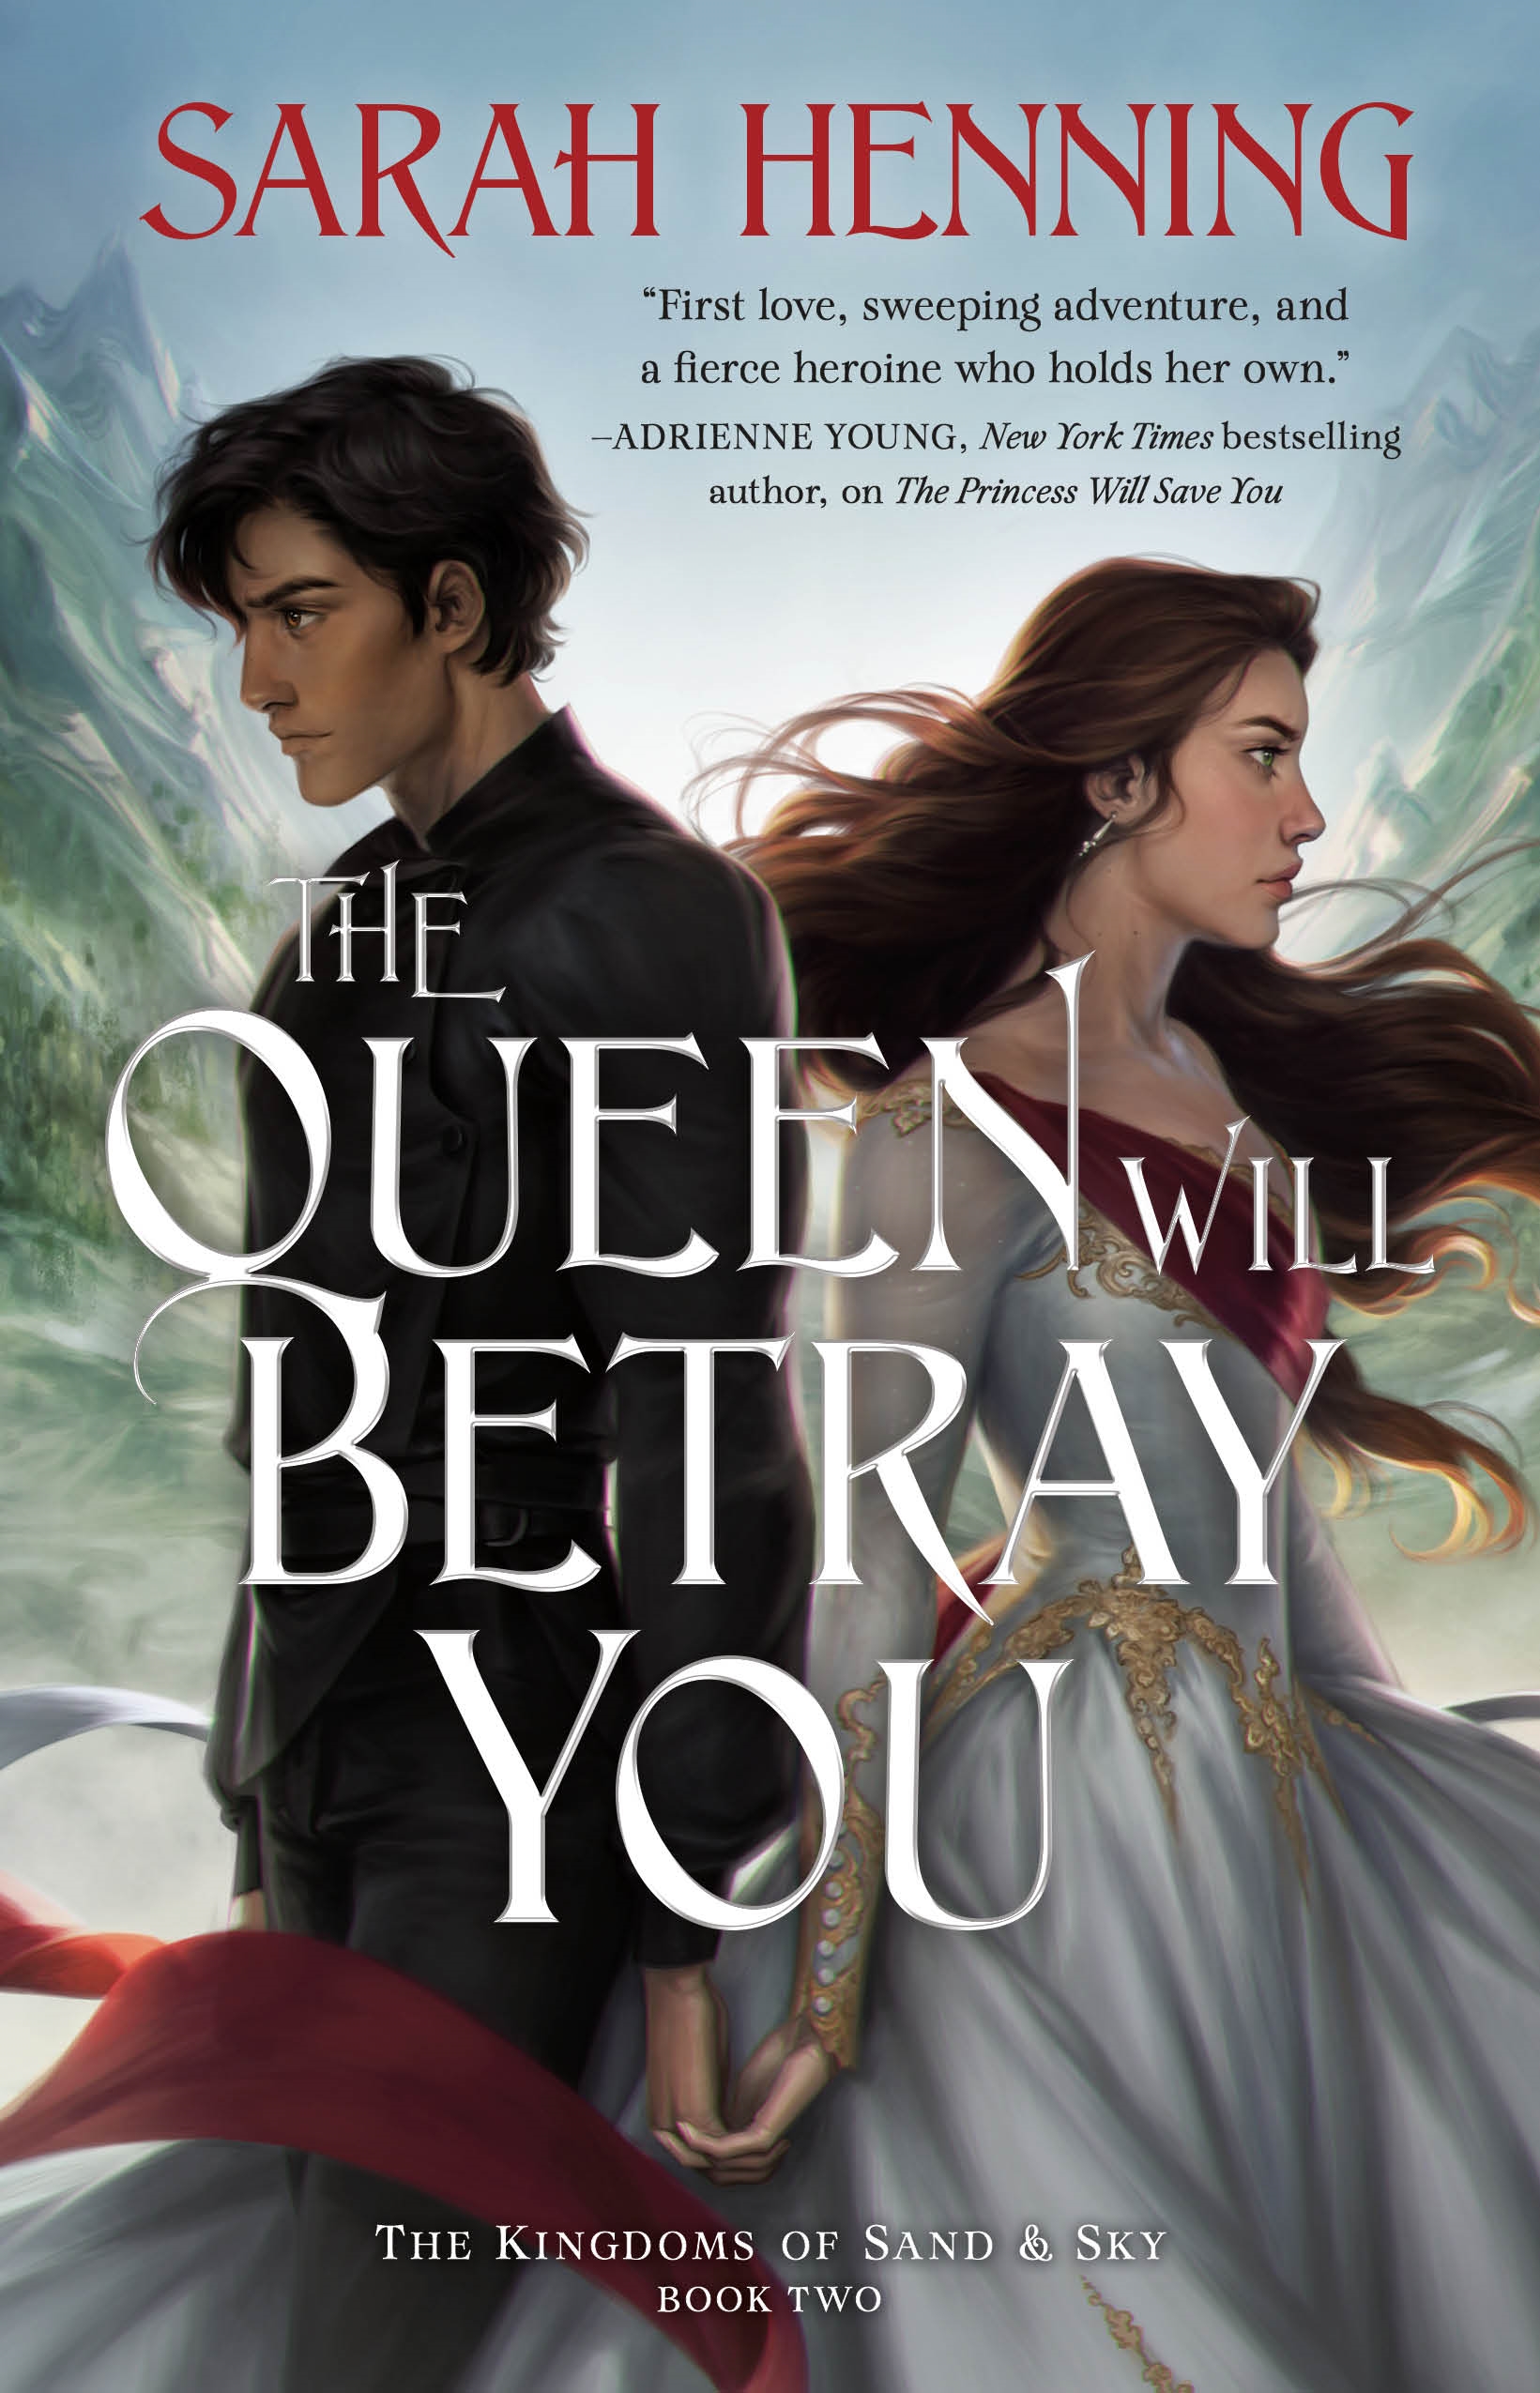 The Queen Will Betray You : The Kingdoms of Sand & Sky Book Two by Sarah Henning